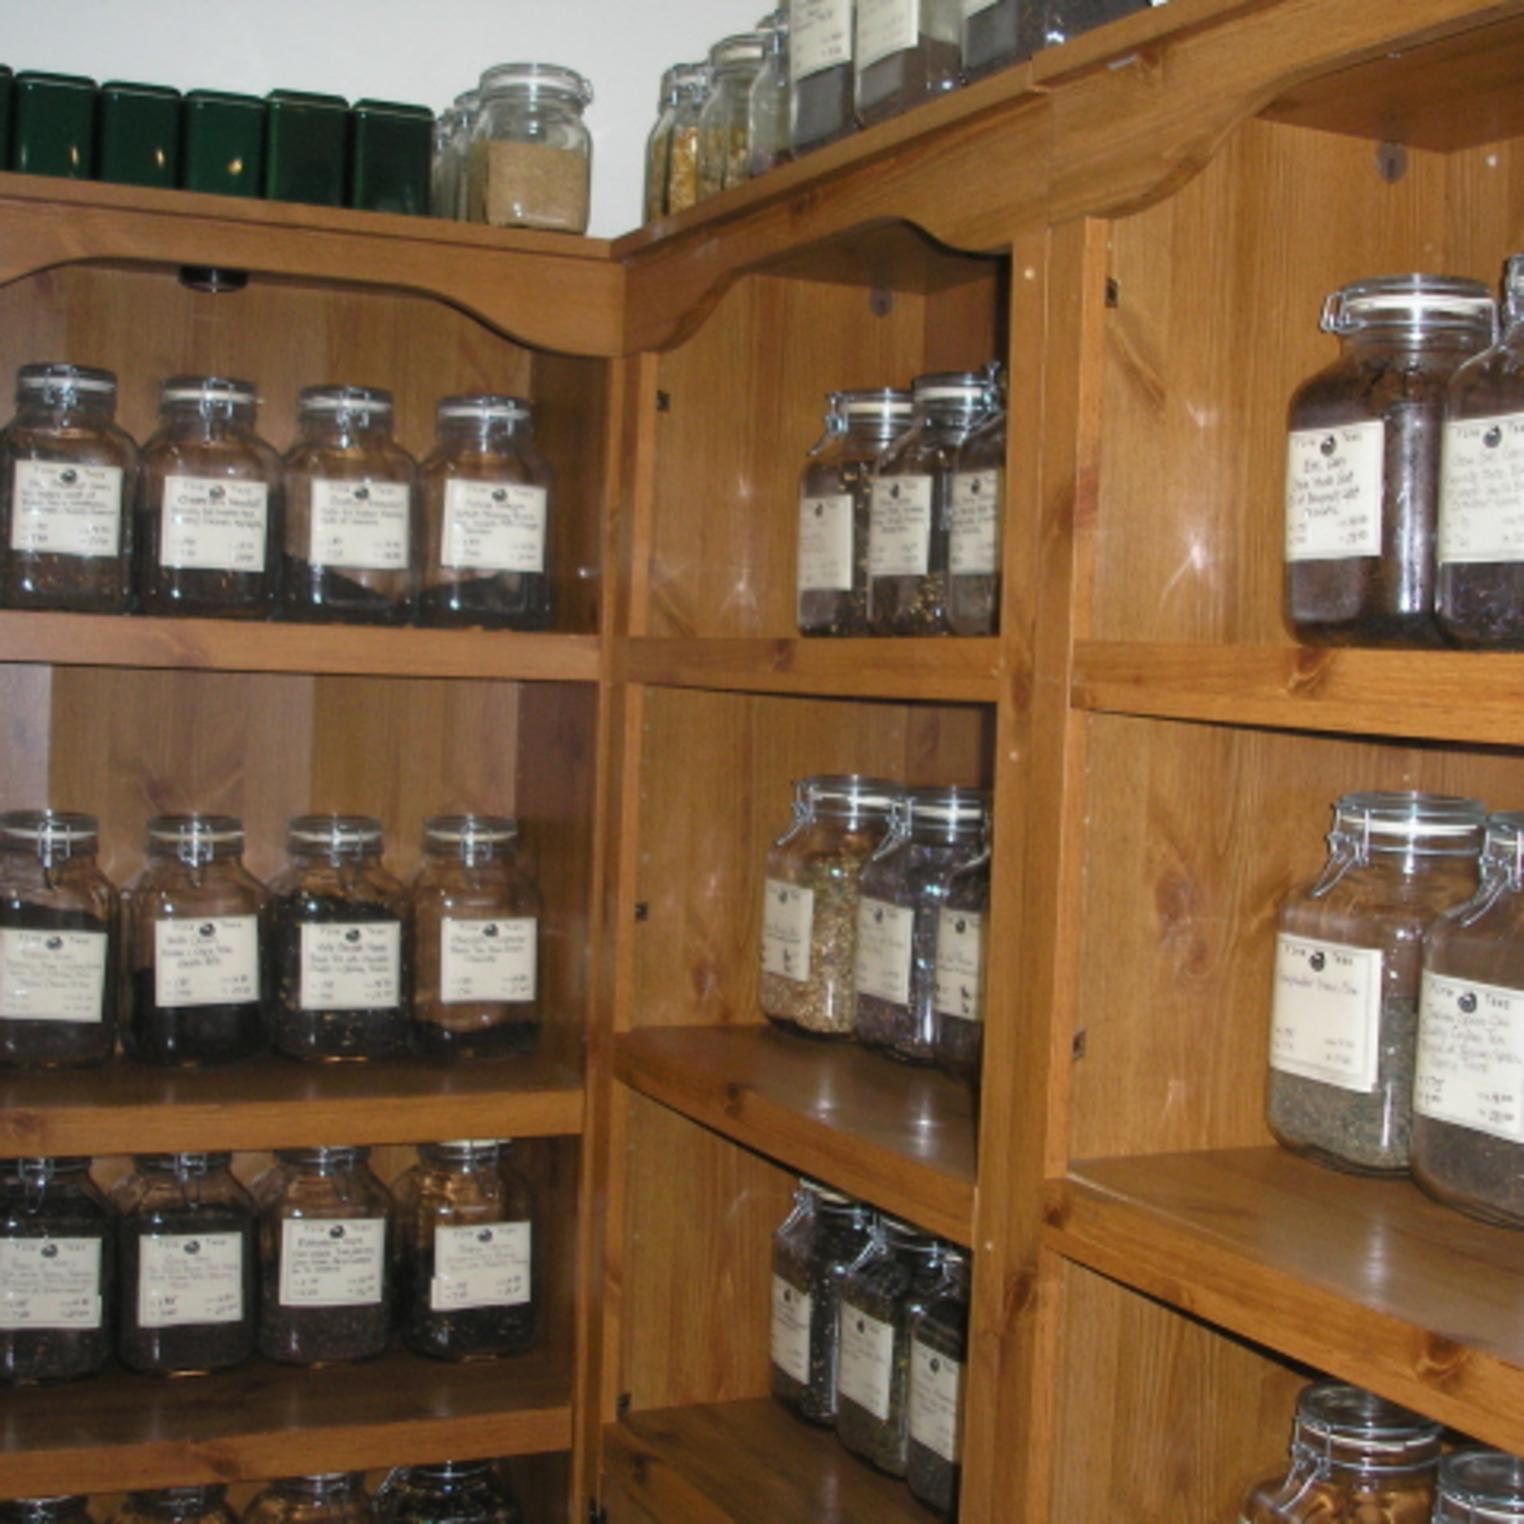 You can find over 70 different kinds of loose and packaged teas.